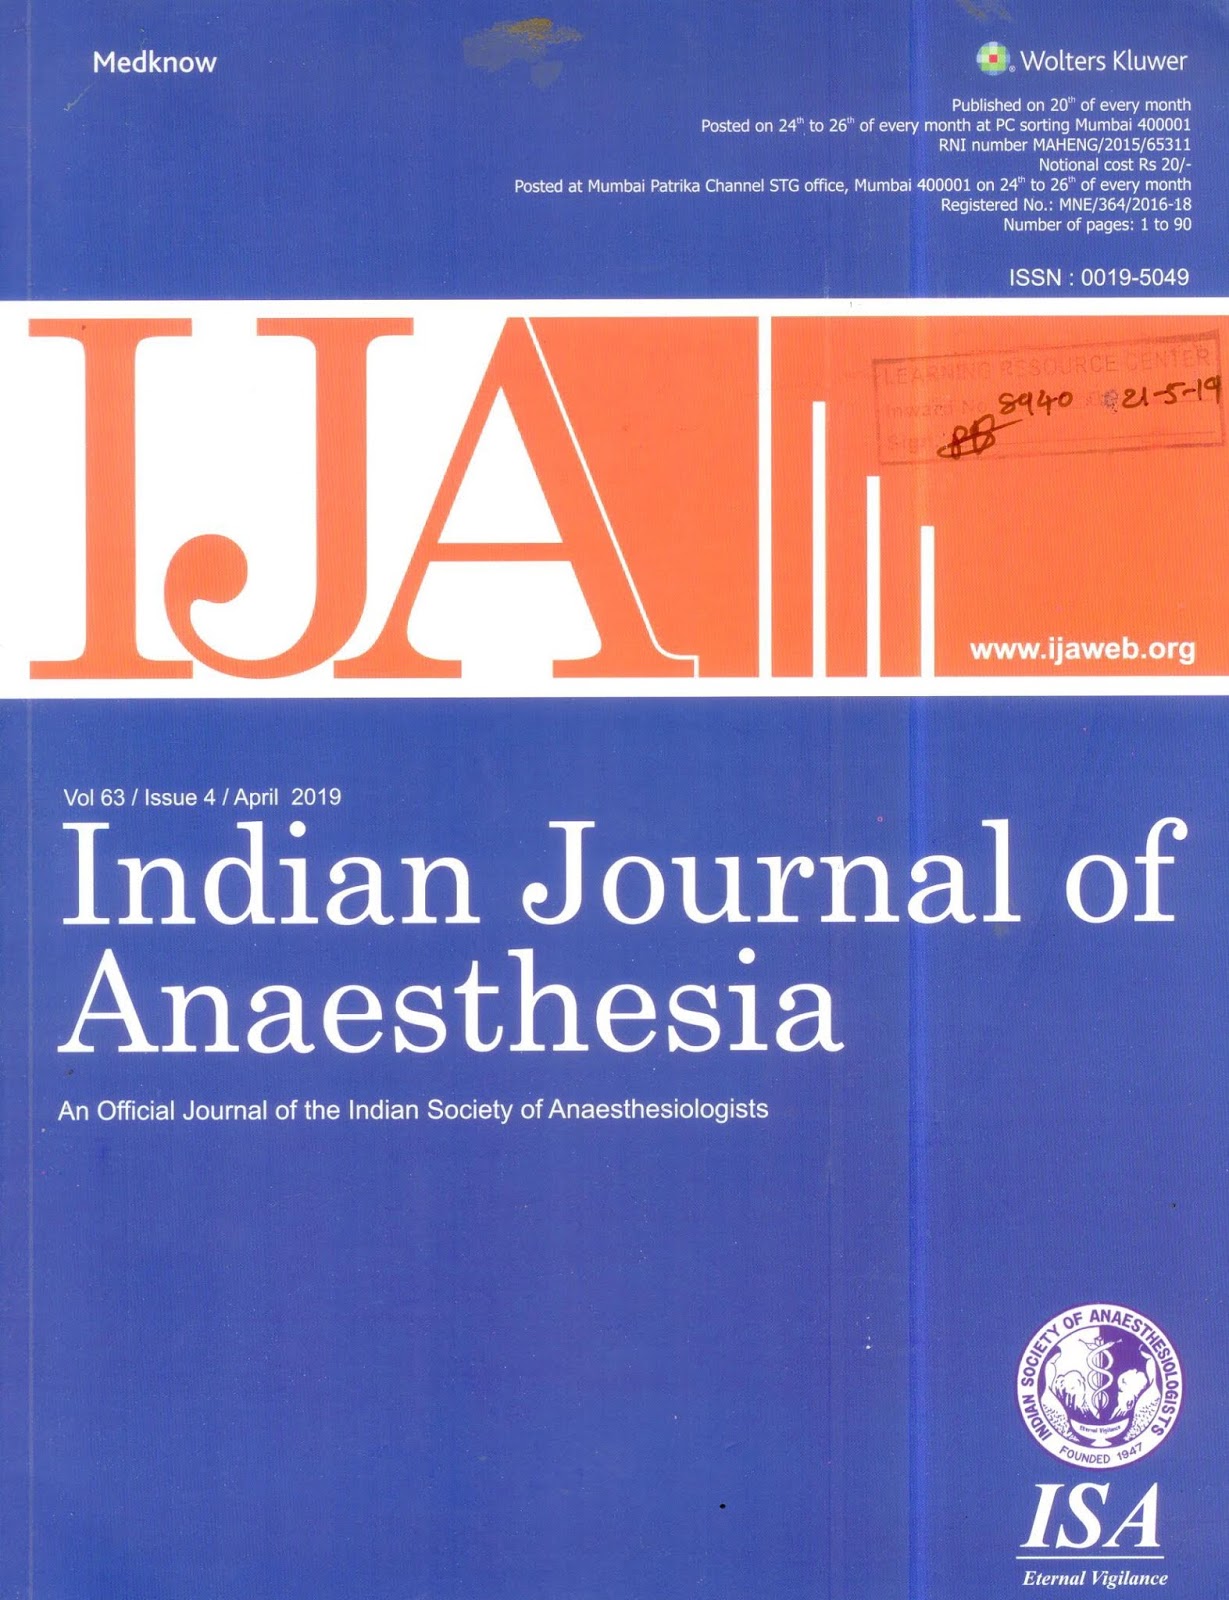 http://www.ijaweb.org/showBackIssue.asp?issn=0019-5049;year=2019;volume=63;issue=4;month=April